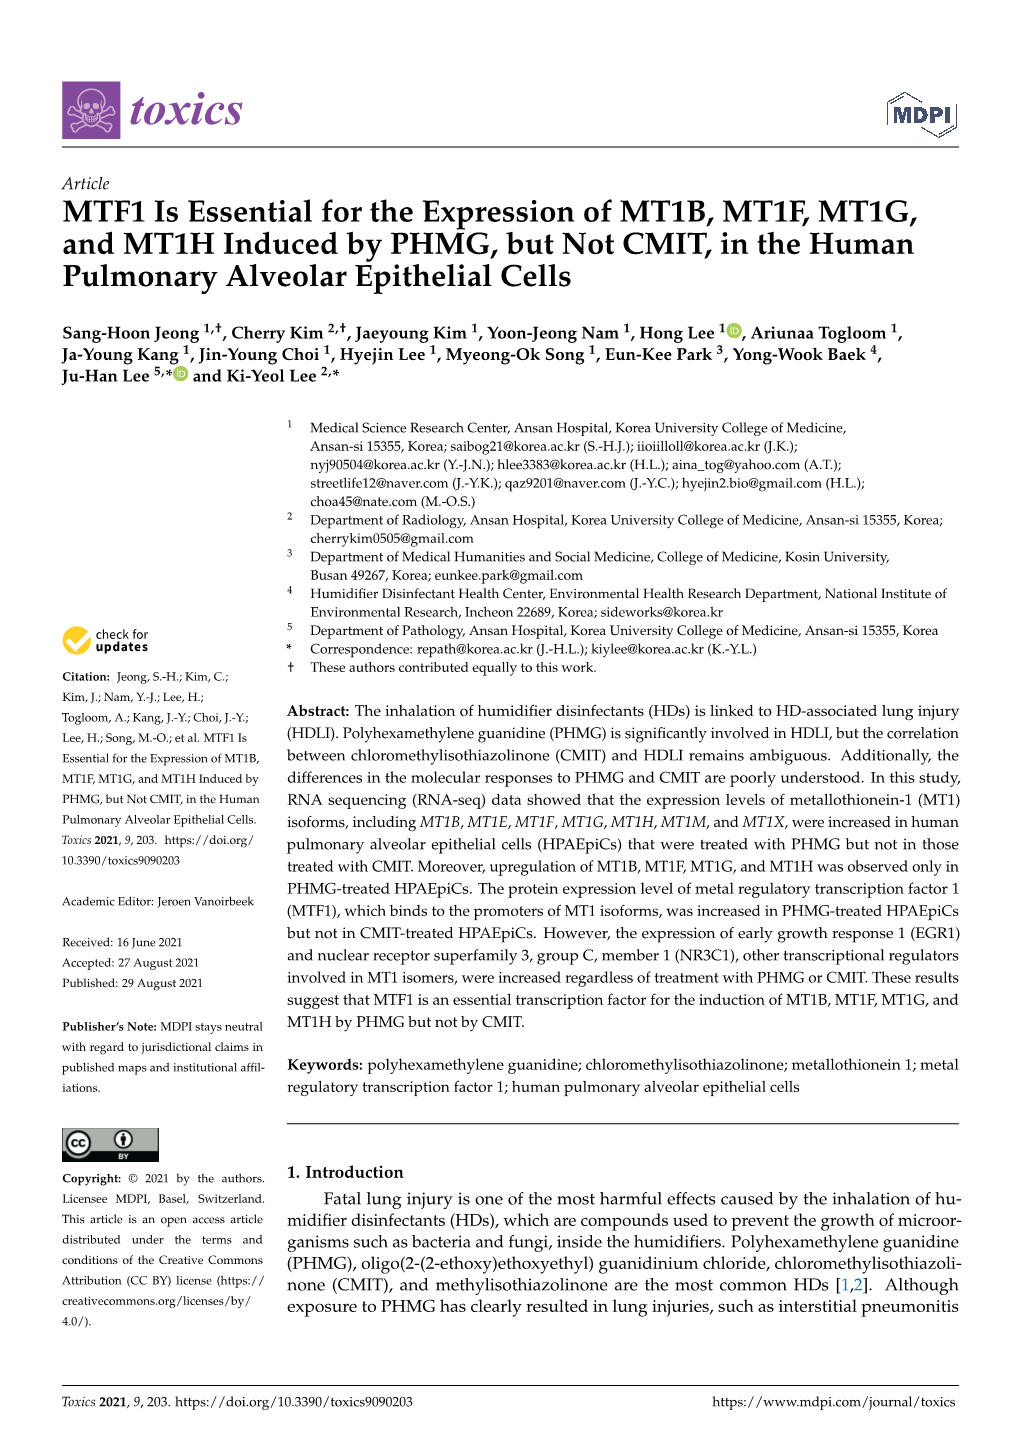 MTF1 Is Essential for the Expression of MT1B, MT1F, MT1G, and MT1H Induced by PHMG, but Not CMIT, in the Human Pulmonary Alveolar Epithelial Cells